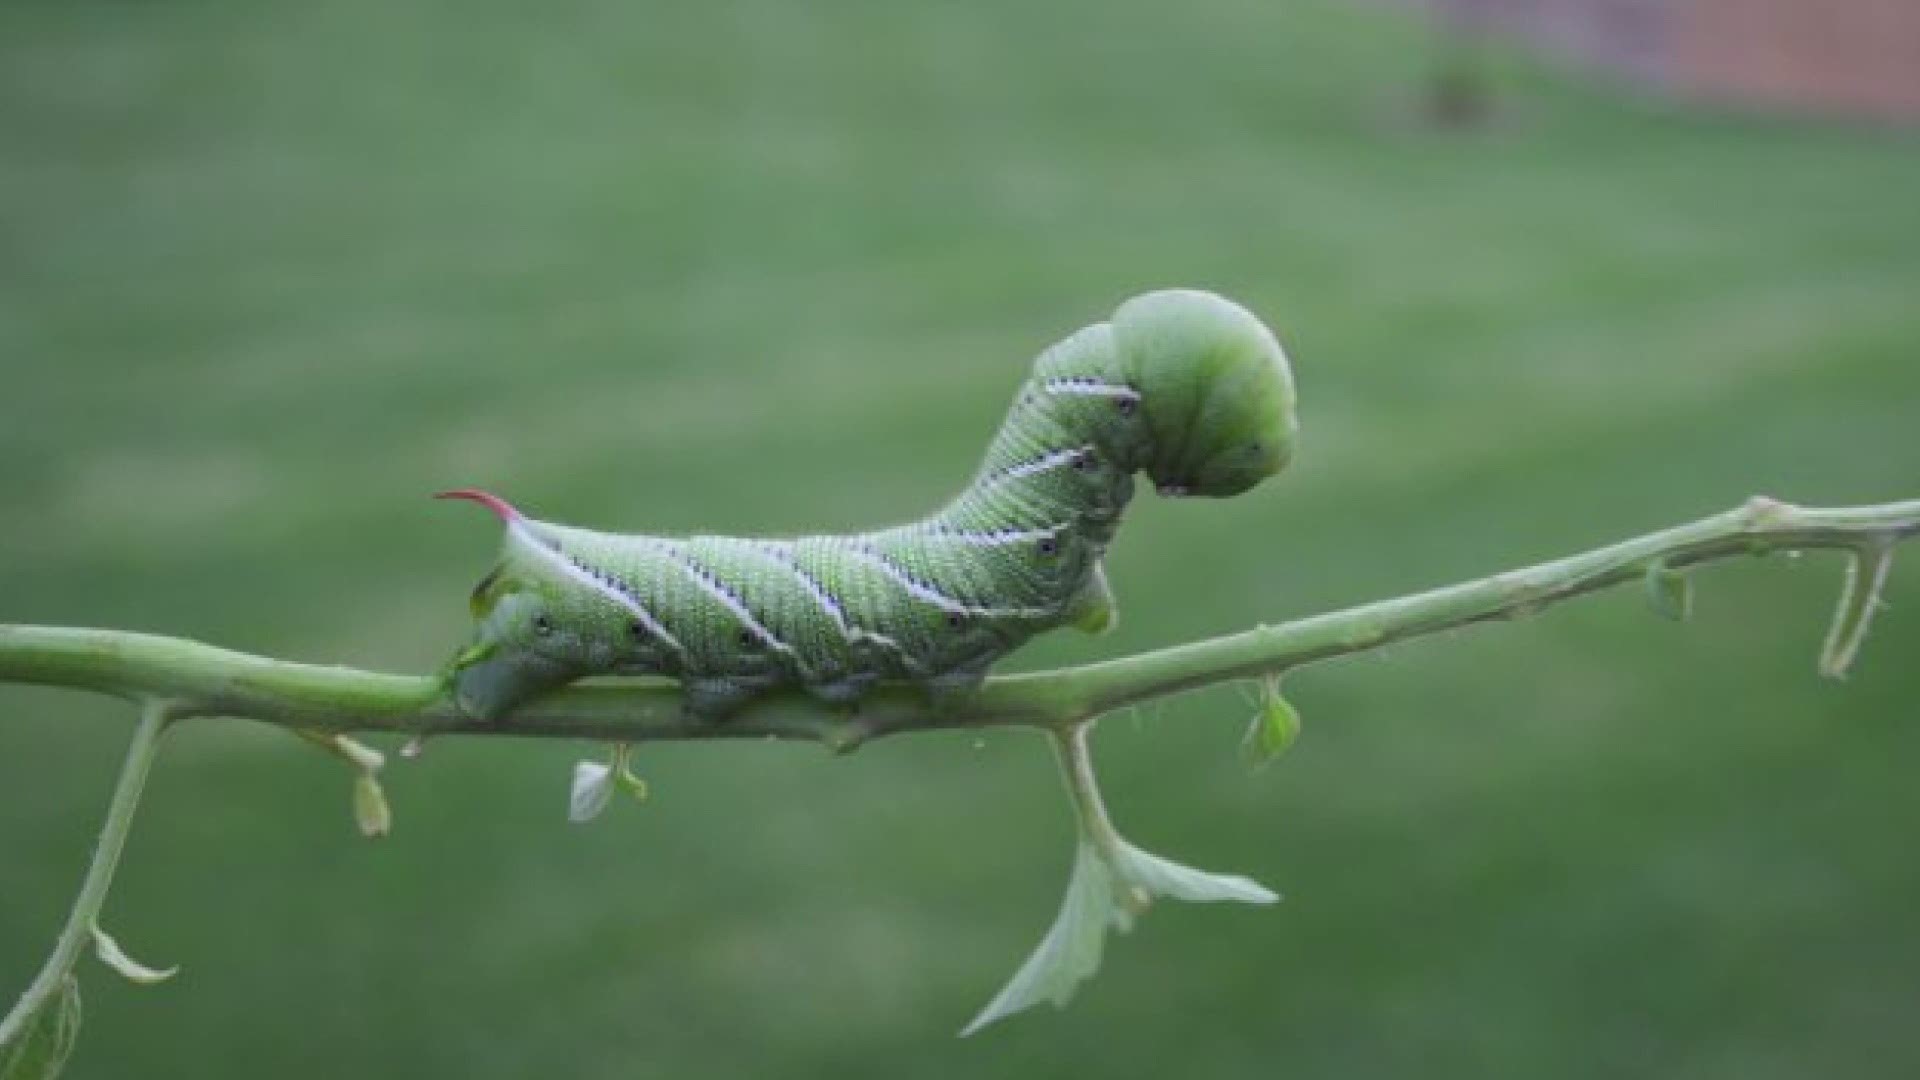 Plant expert Rick Vuyst says hornworms target tomato and pepper plants.